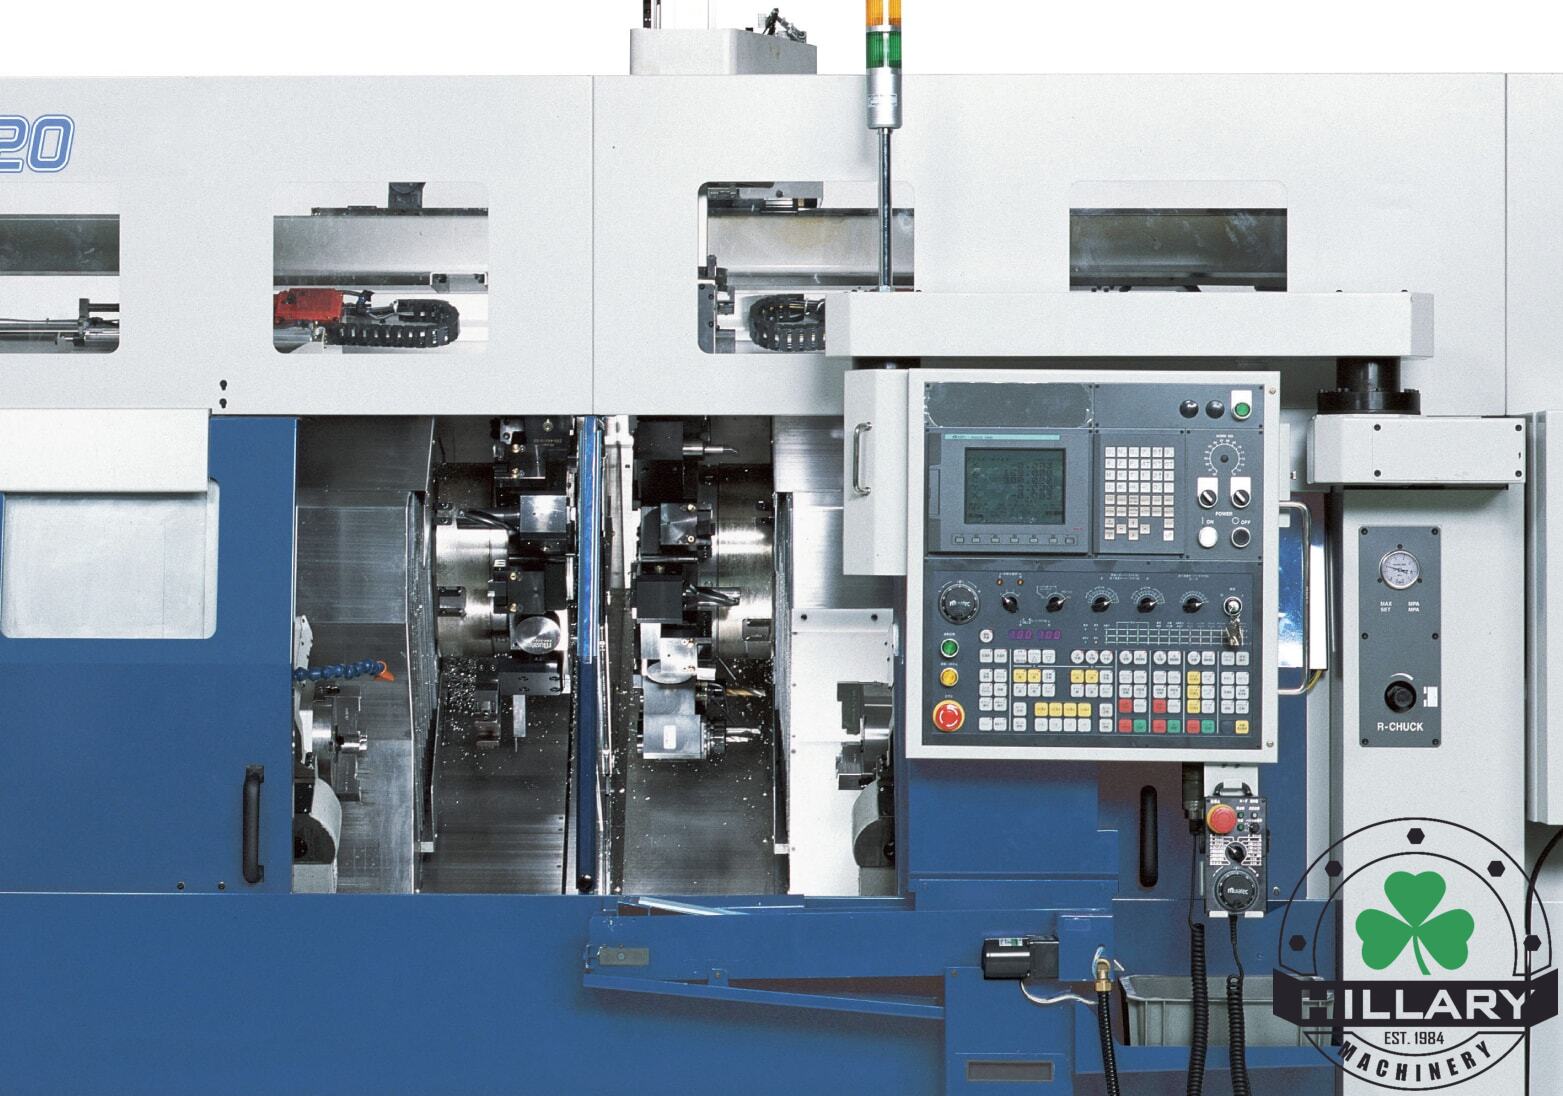 MURATEC MT20 Automated Turning Centers | Hillary Machinery